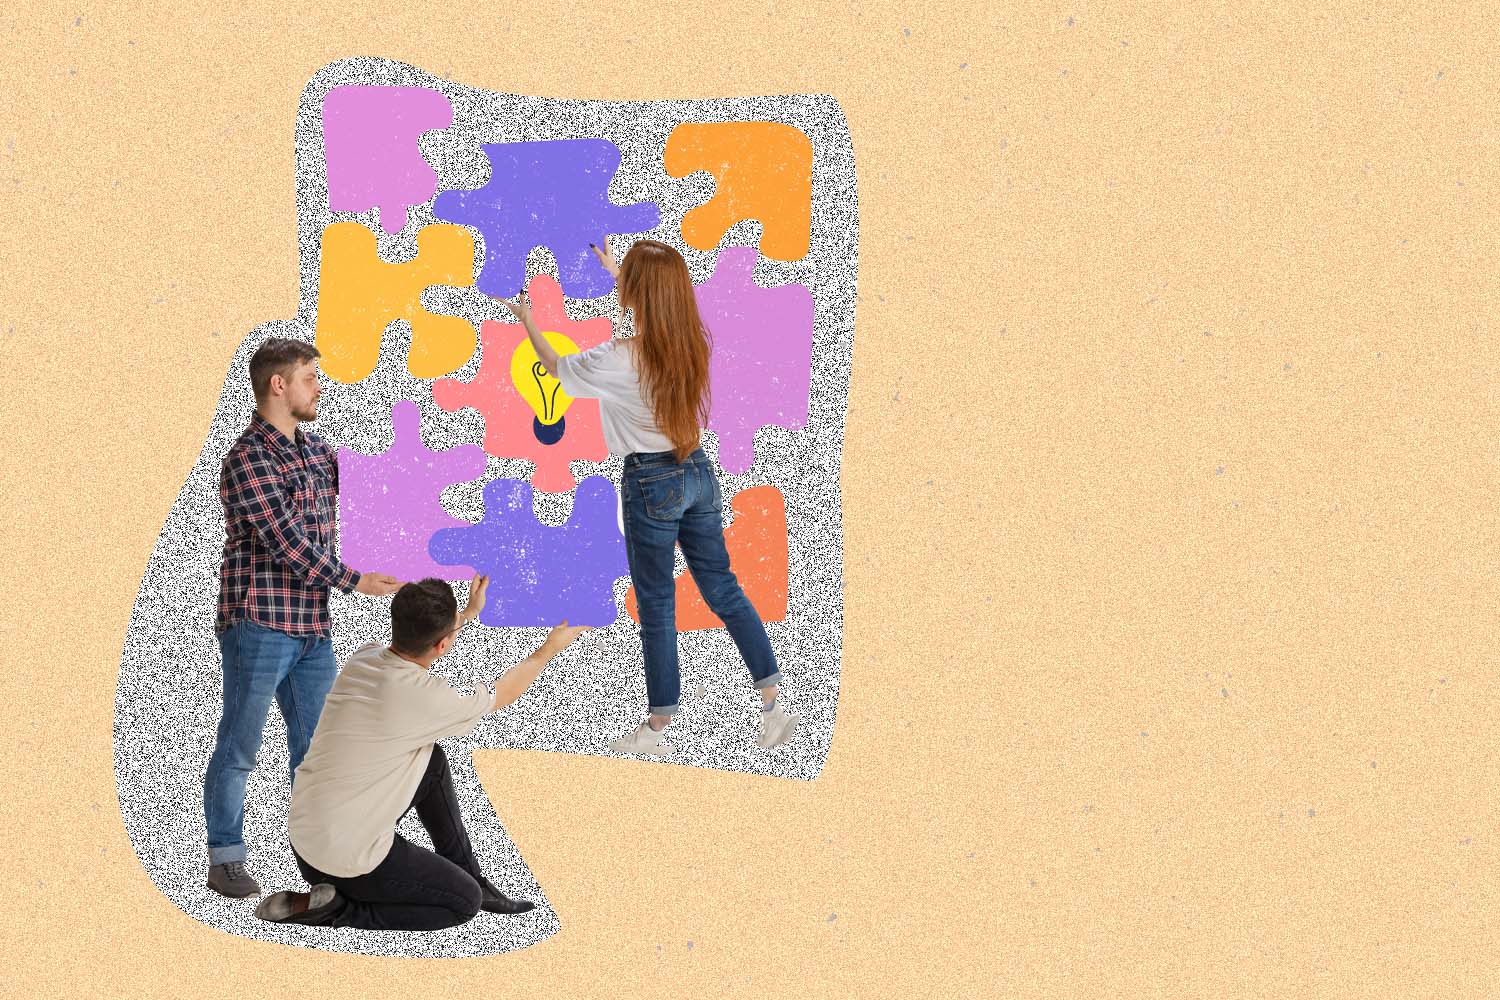 People work on a puzzle together